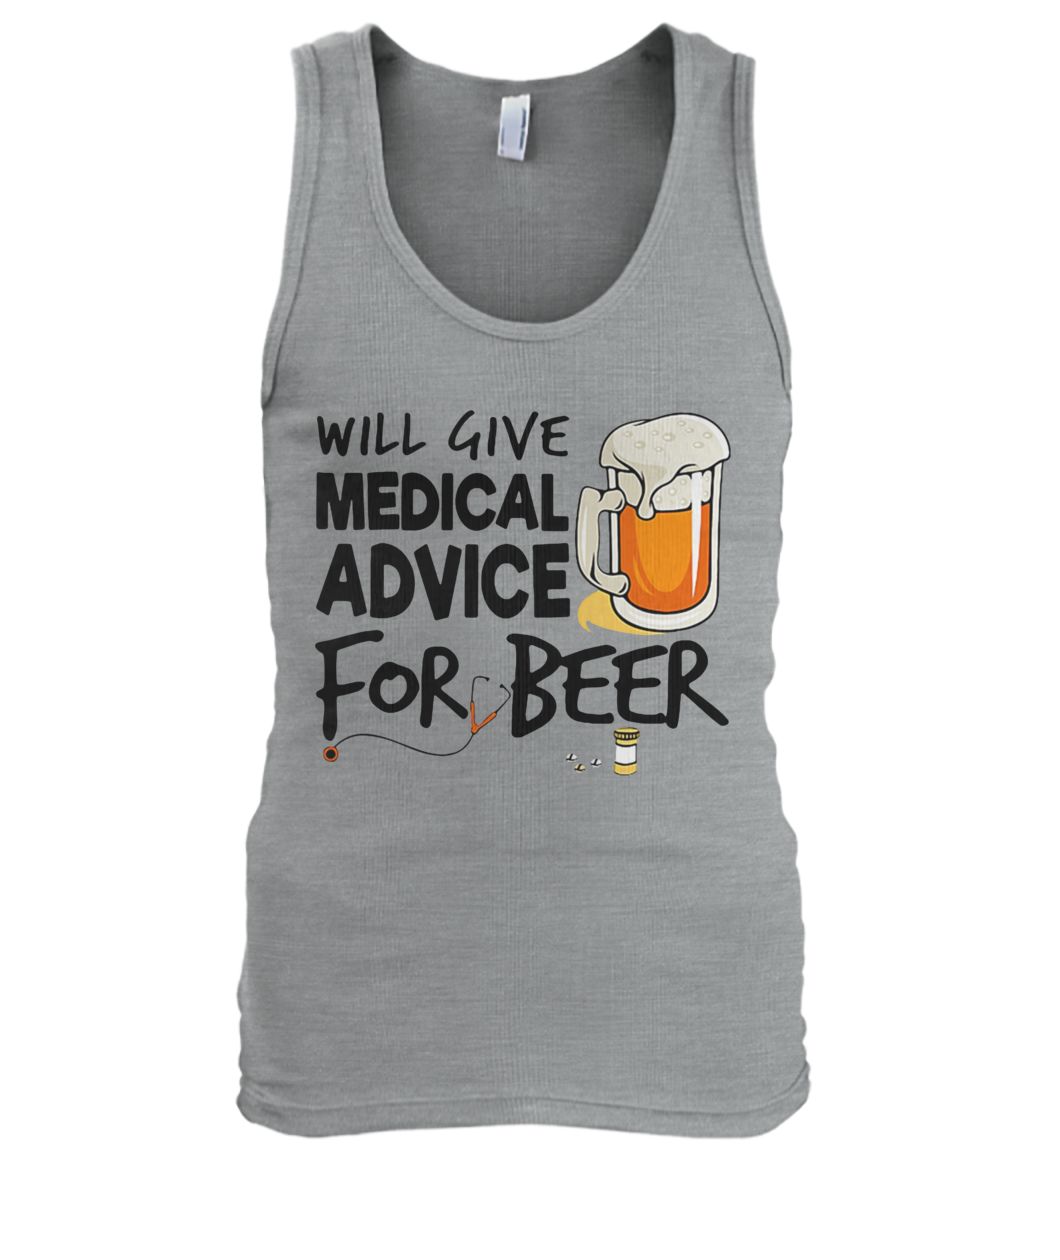 Will give medical advice for beer men's tank top